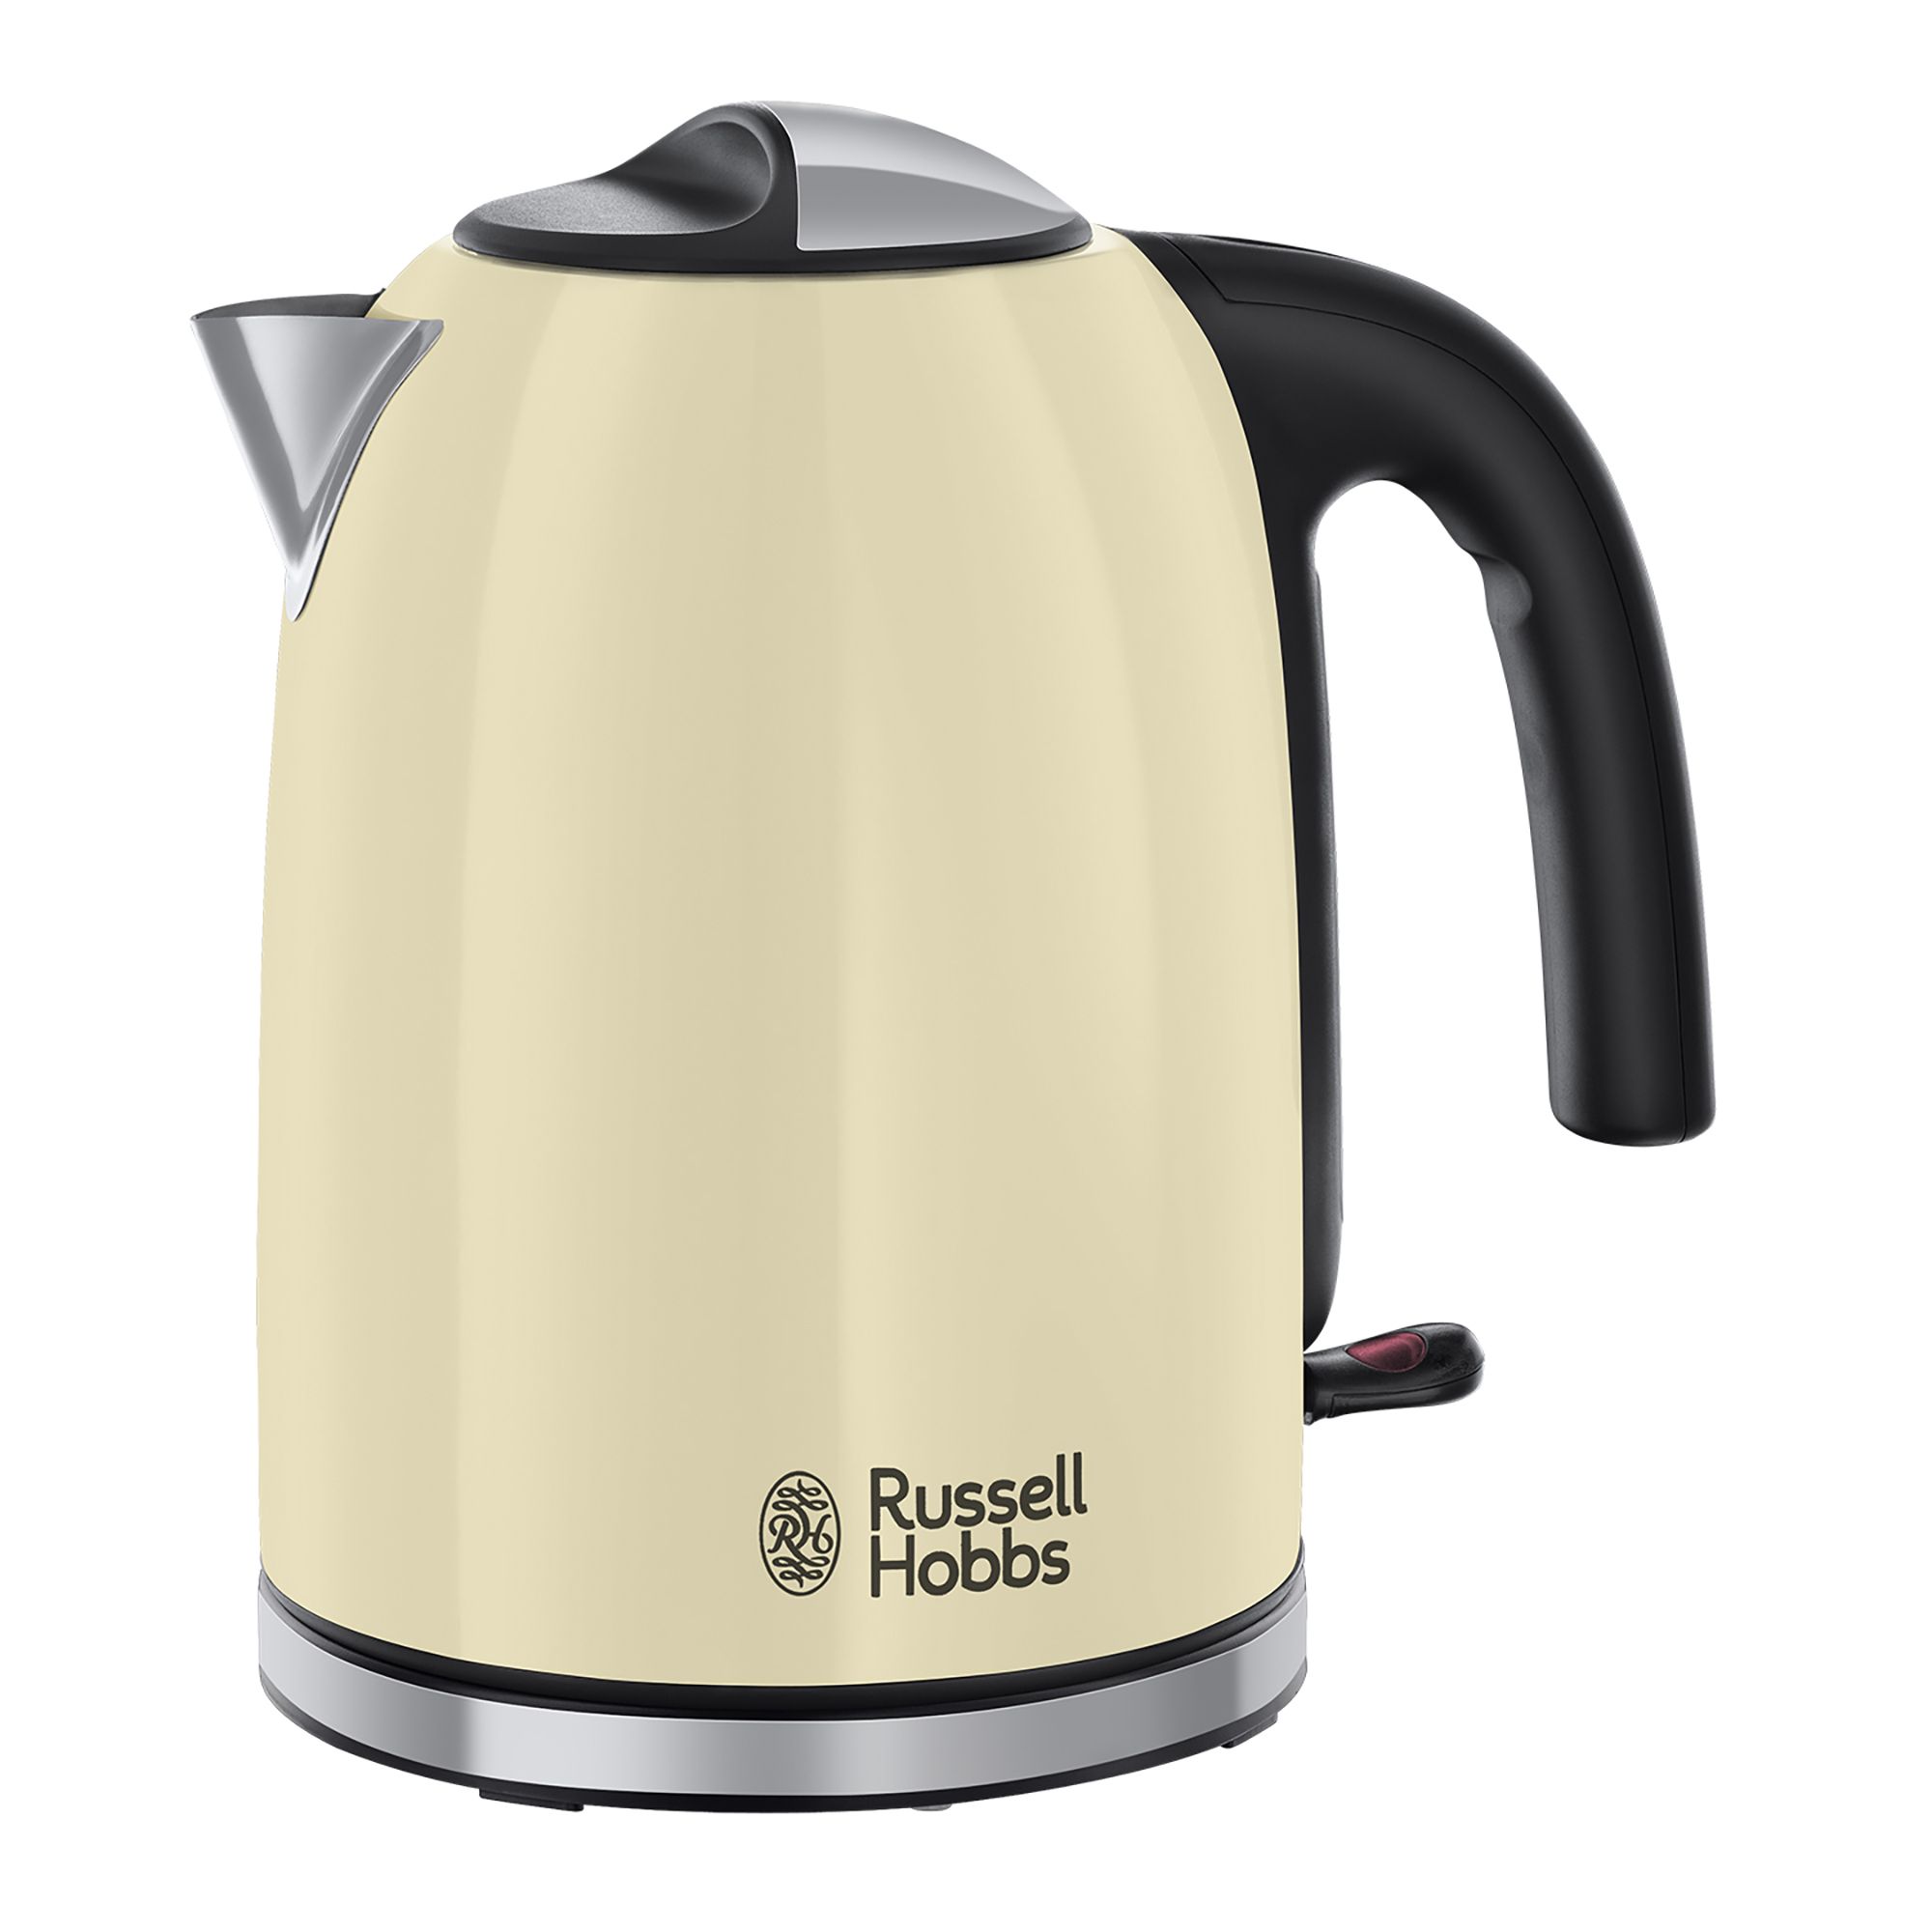 Russell Hobbs Groove Kettle review: fast and efficient with a